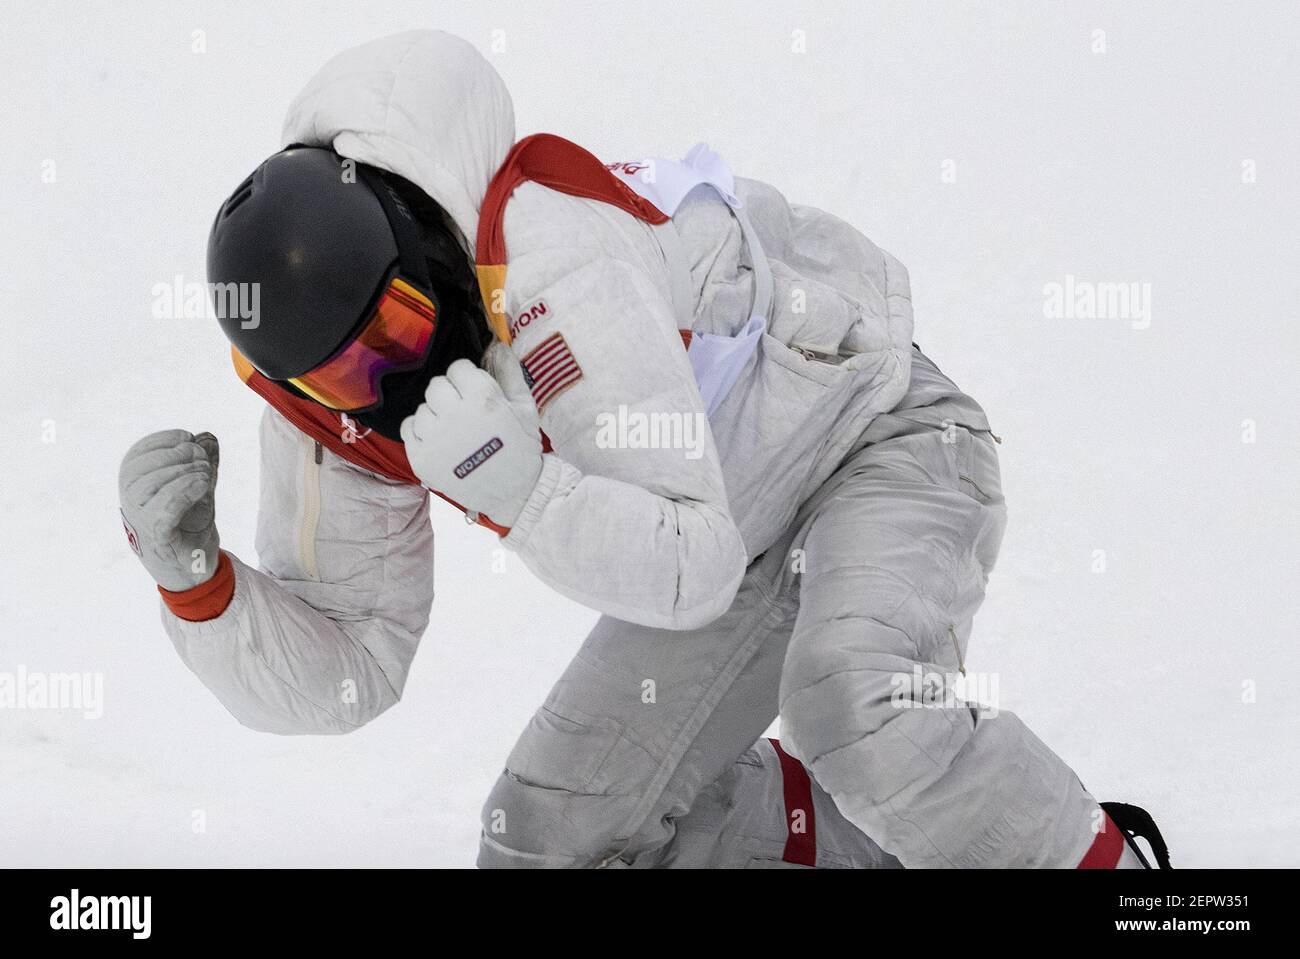 Shaun White of the USA reacts after his final run during the Men's Half Pipe Snowboard finals at Phoenix Park in South Korea on Wednesday, Feb. 14, 2018, 2018, during the Pyeongchang Winter Olympics. (Photo by Carlos Gonzalez/Minneapolis Star Tribune/TNS/Sipa USA) Stock Photo